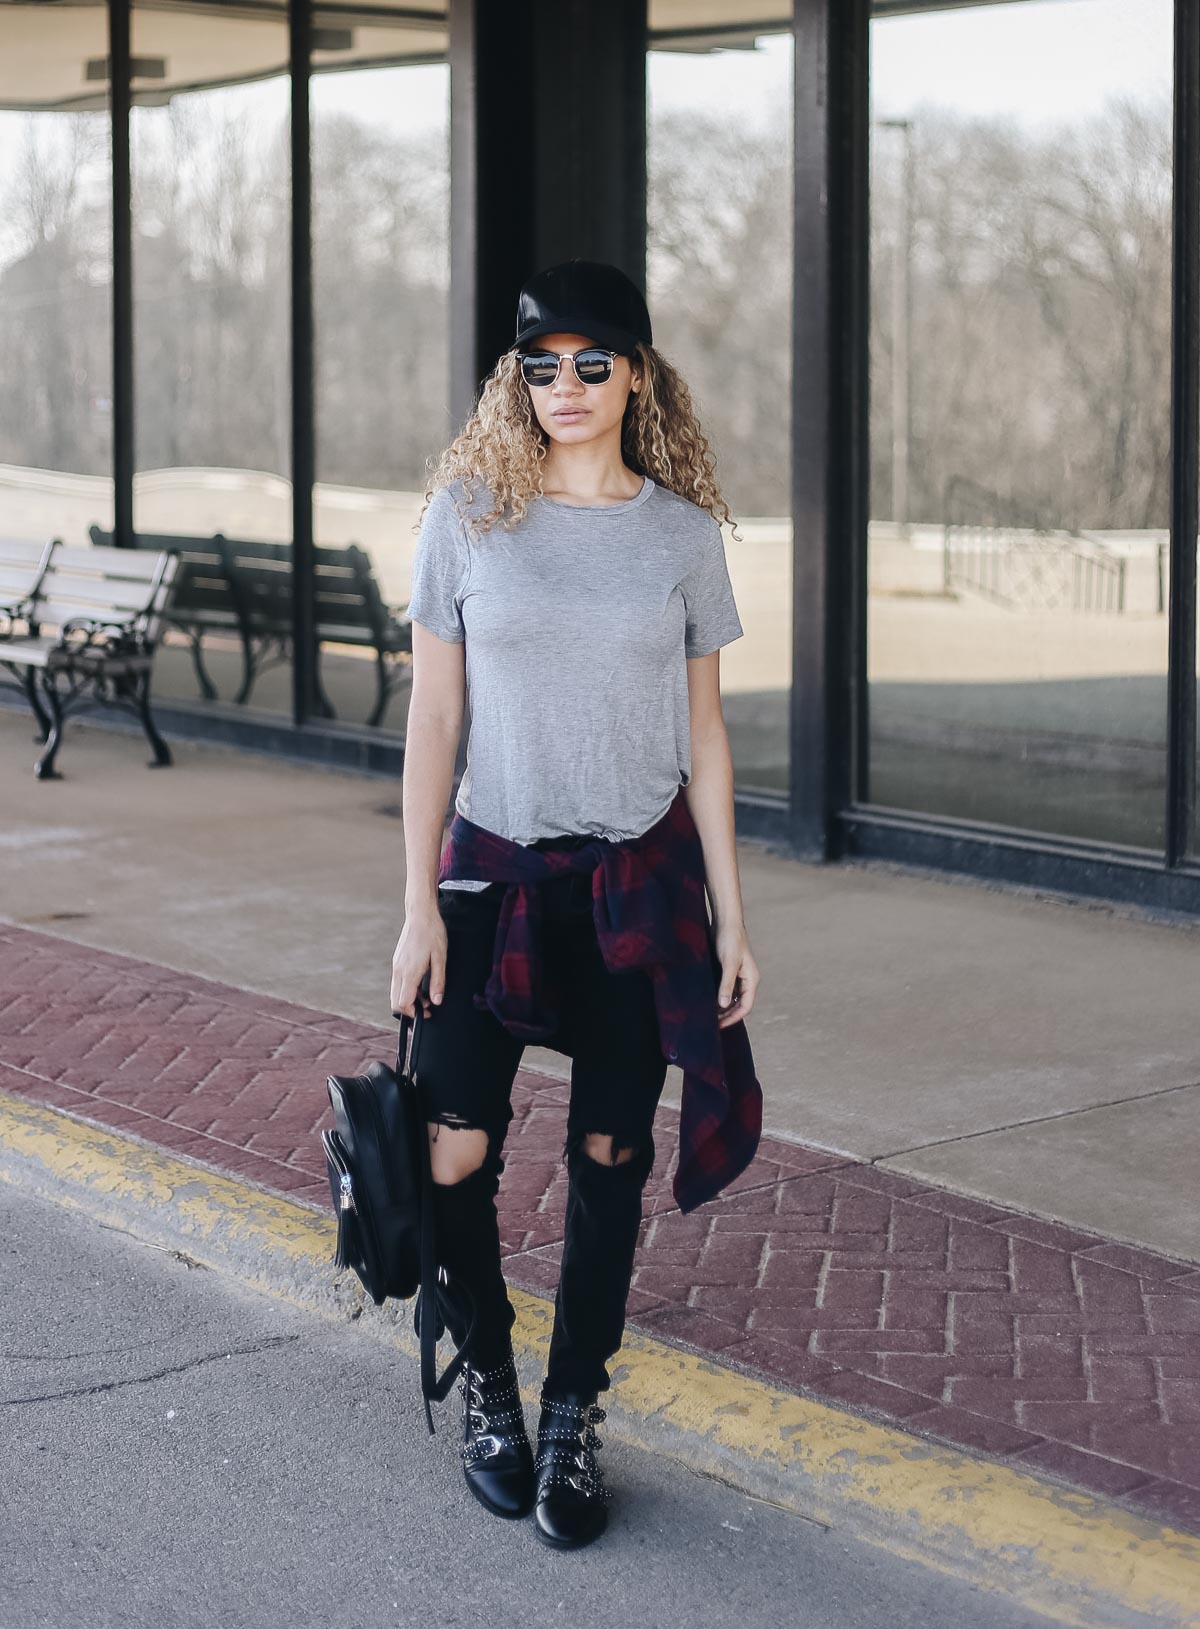 comfy airport outfit with a basic tee and ankle boots